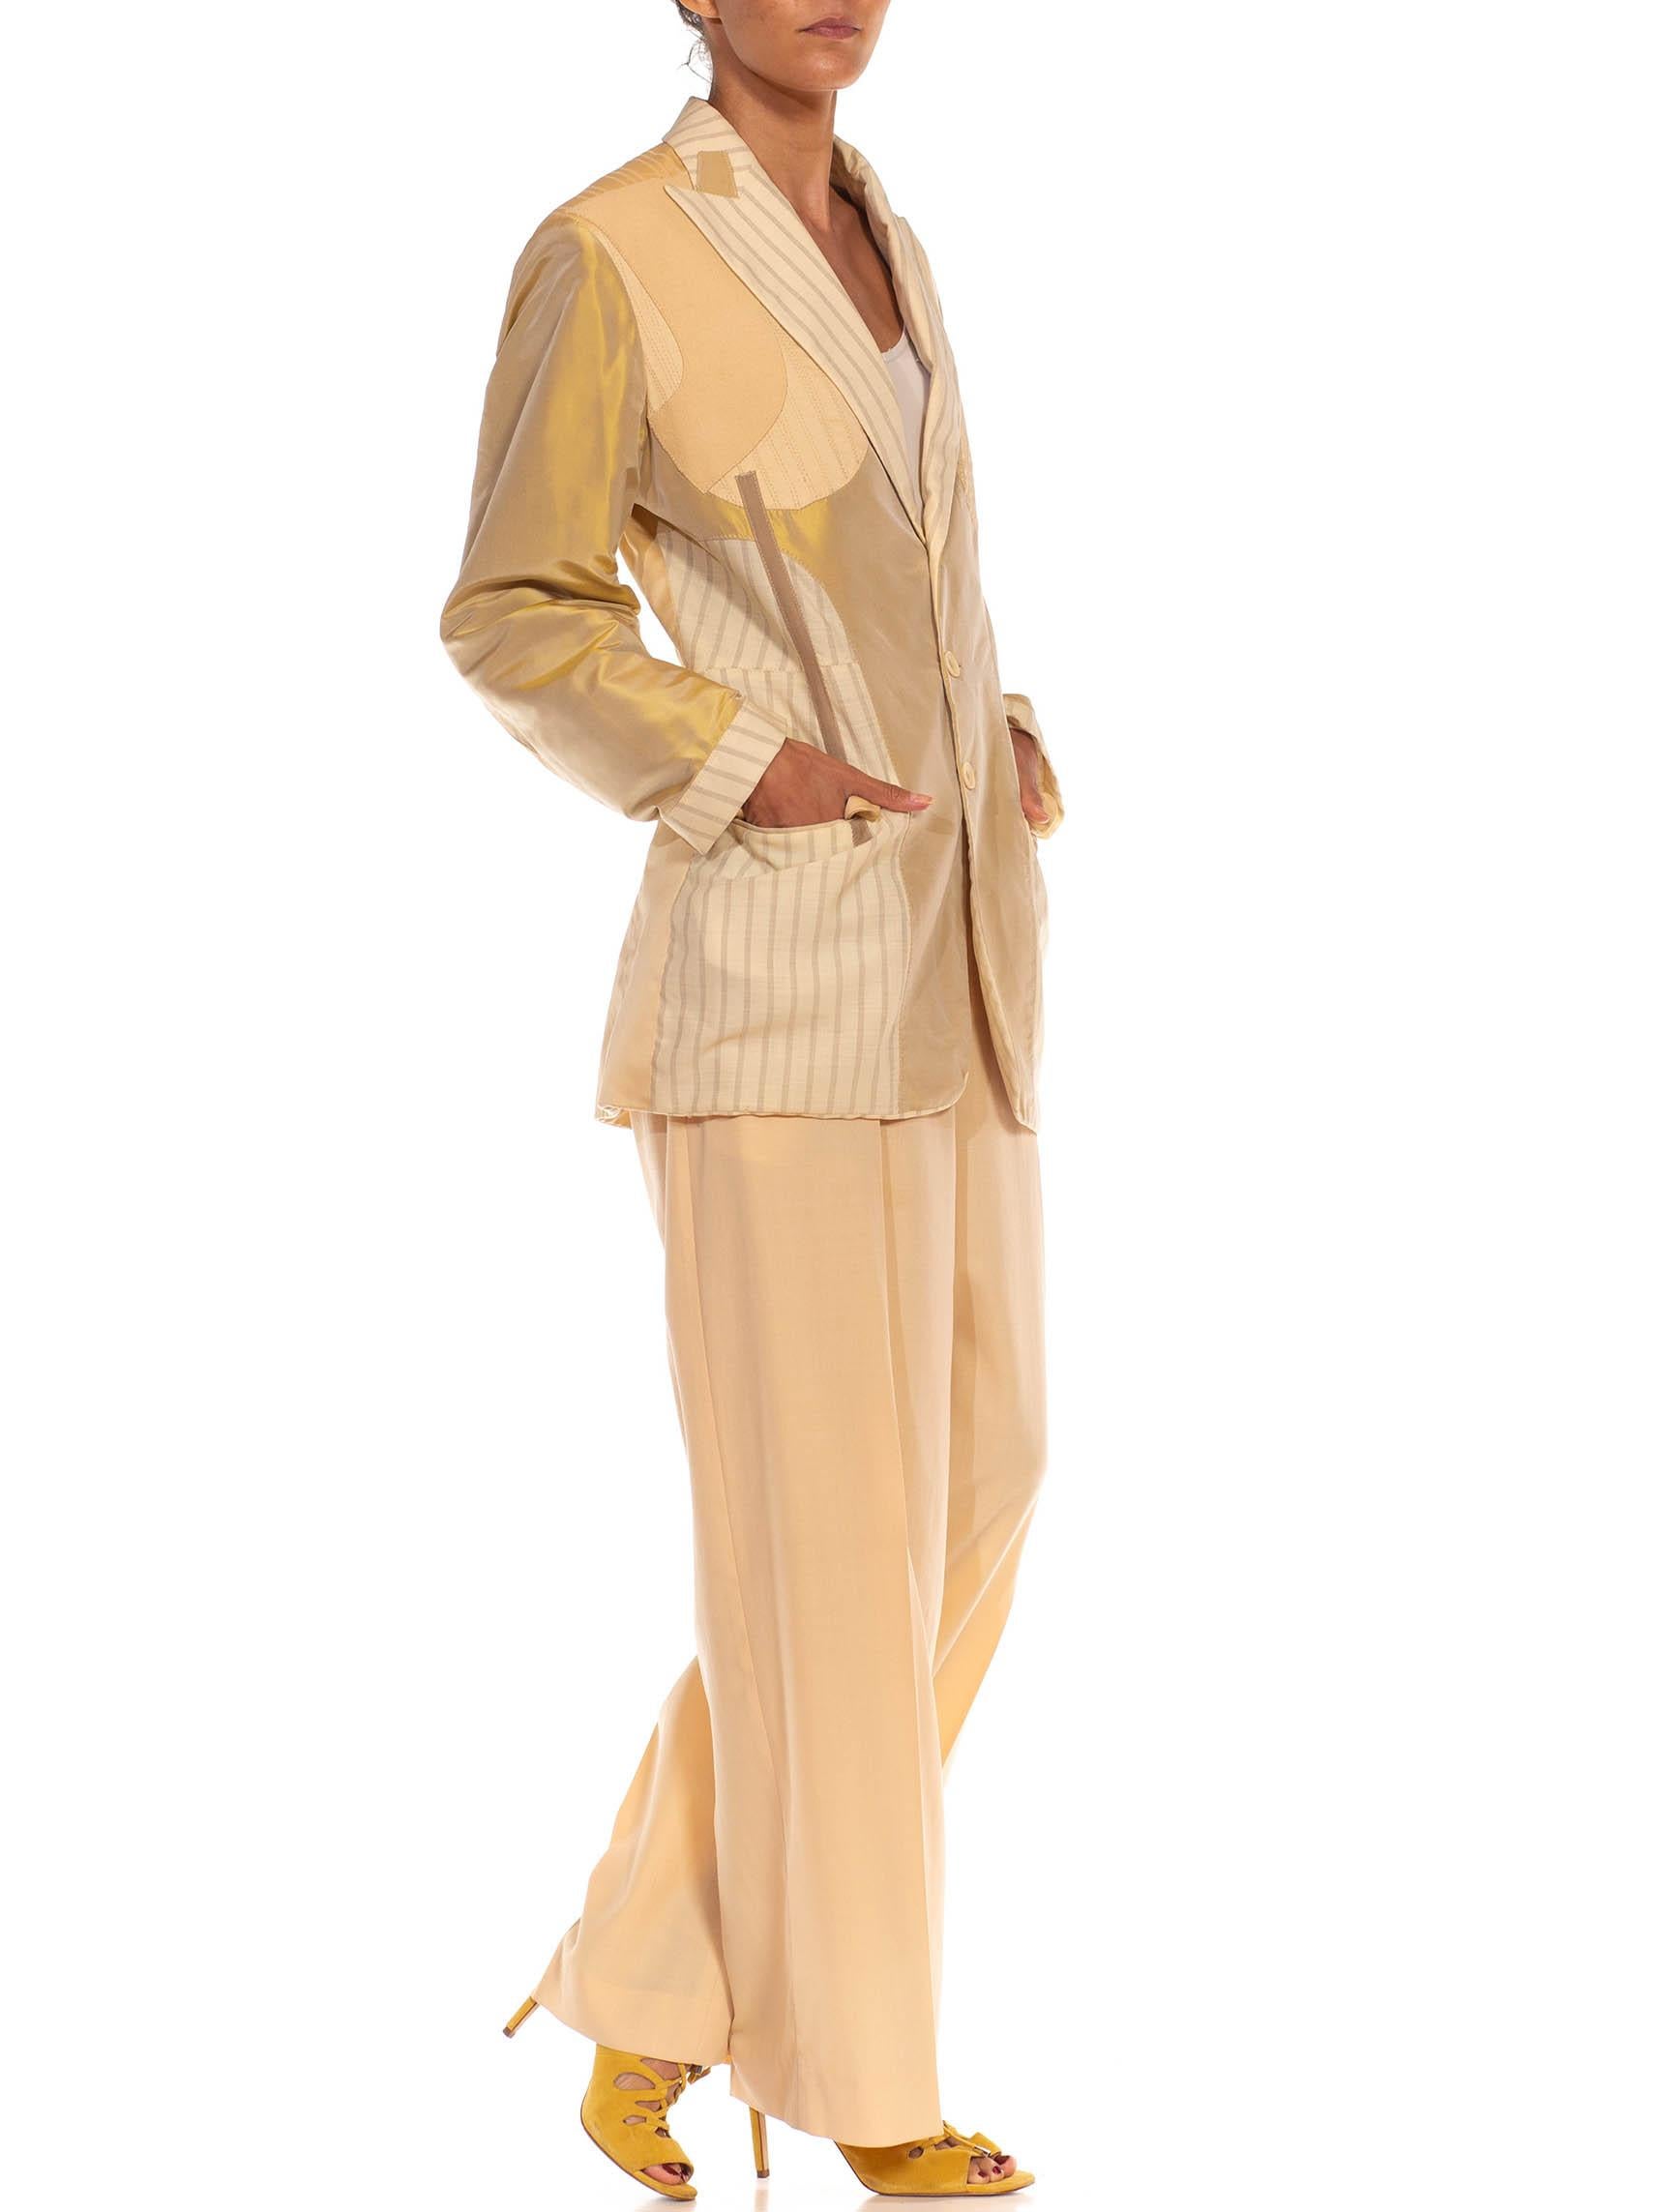 1990S JEAN PAUL GAULTIER Peach & Cream Wool Taffeta Patchwork Suit In Excellent Condition For Sale In New York, NY